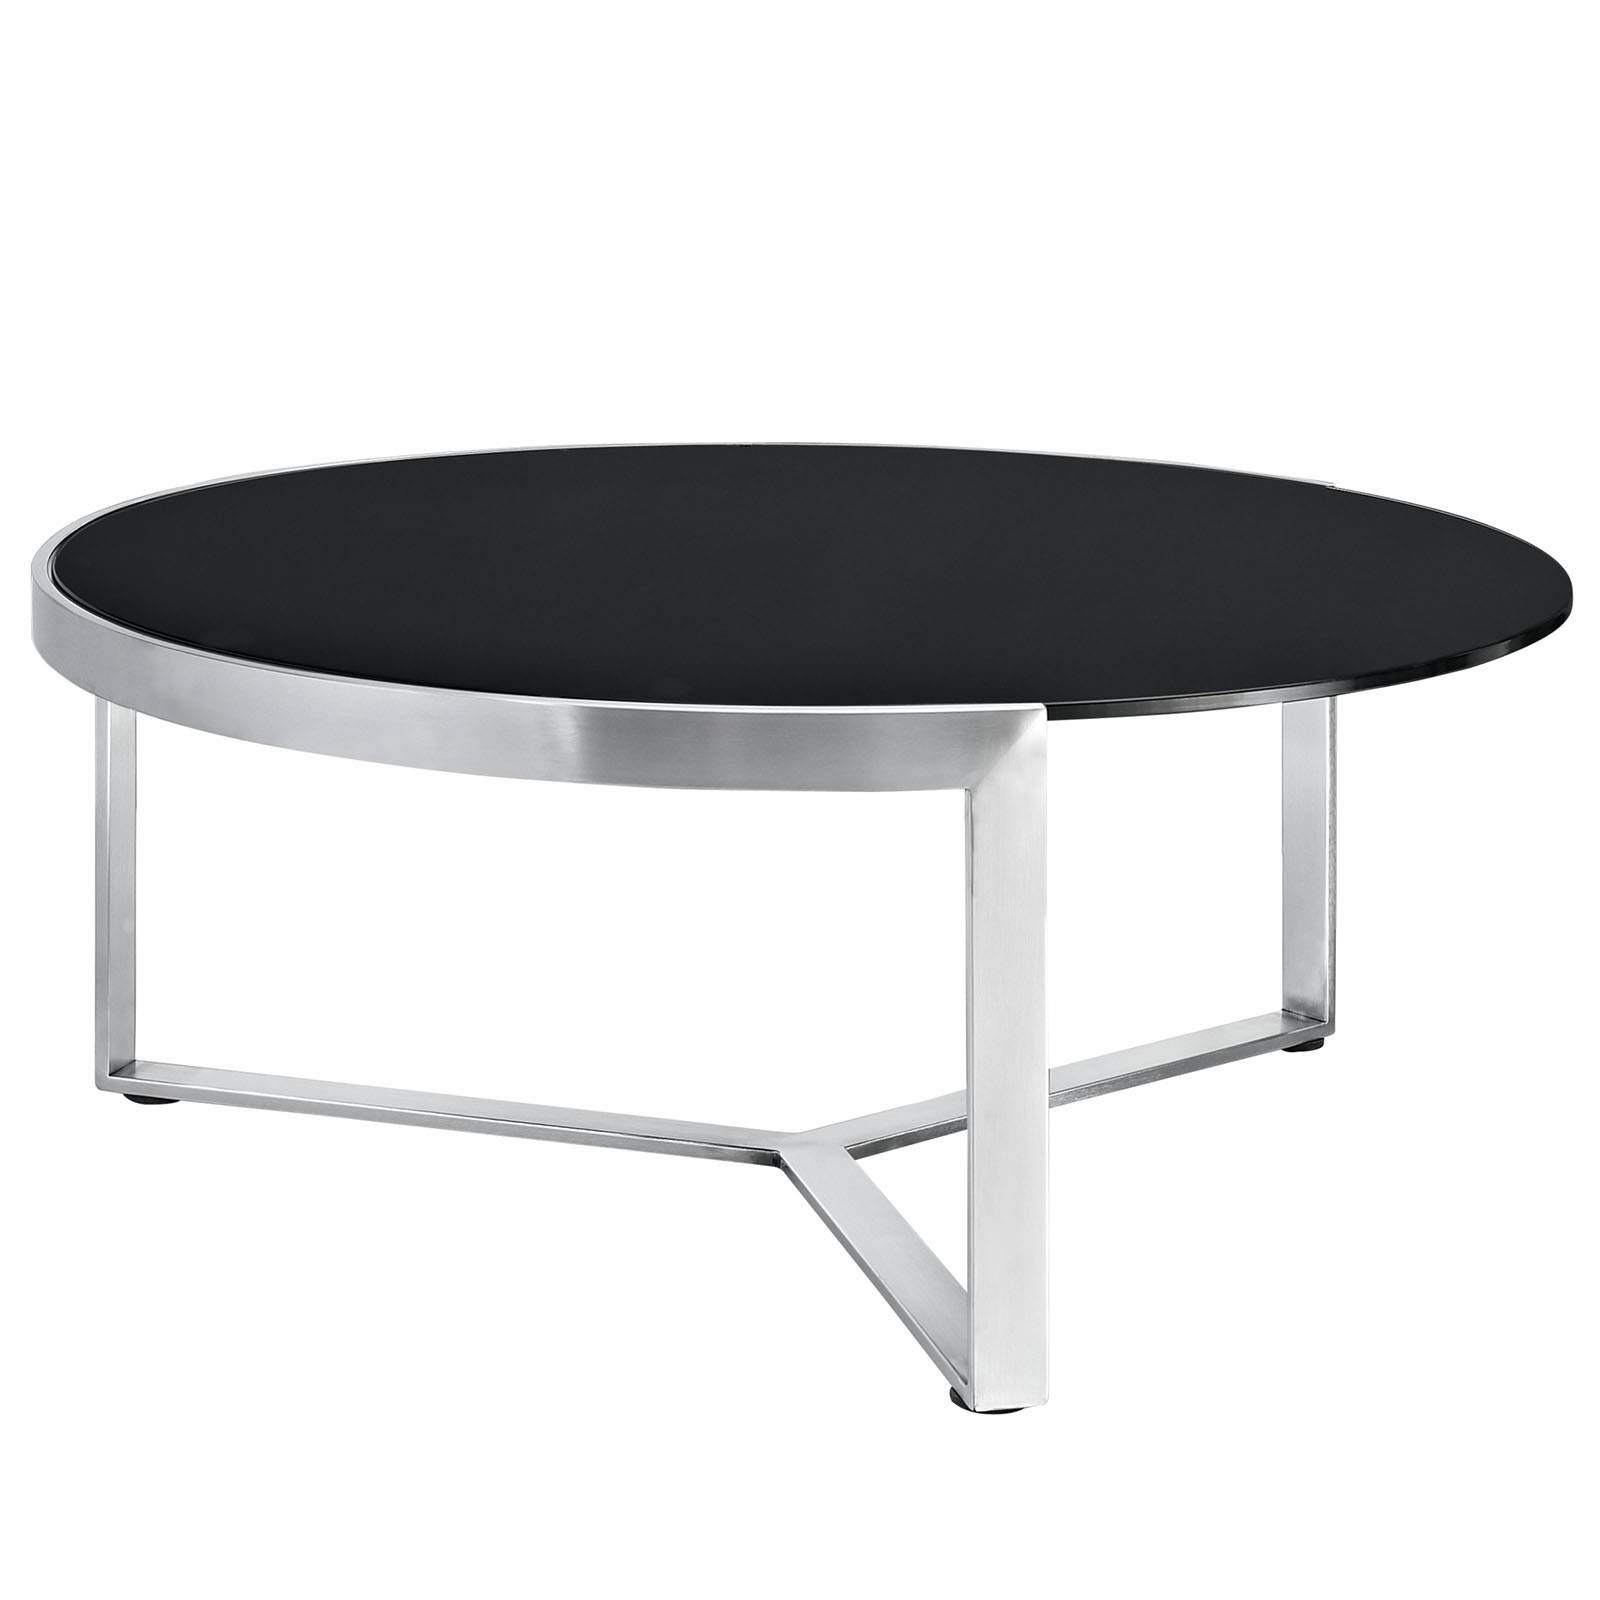 Coffee Table: Luxury Modern Round Coffee Table Living Room Round Pertaining To Black Circle Coffee Tables (View 11 of 30)